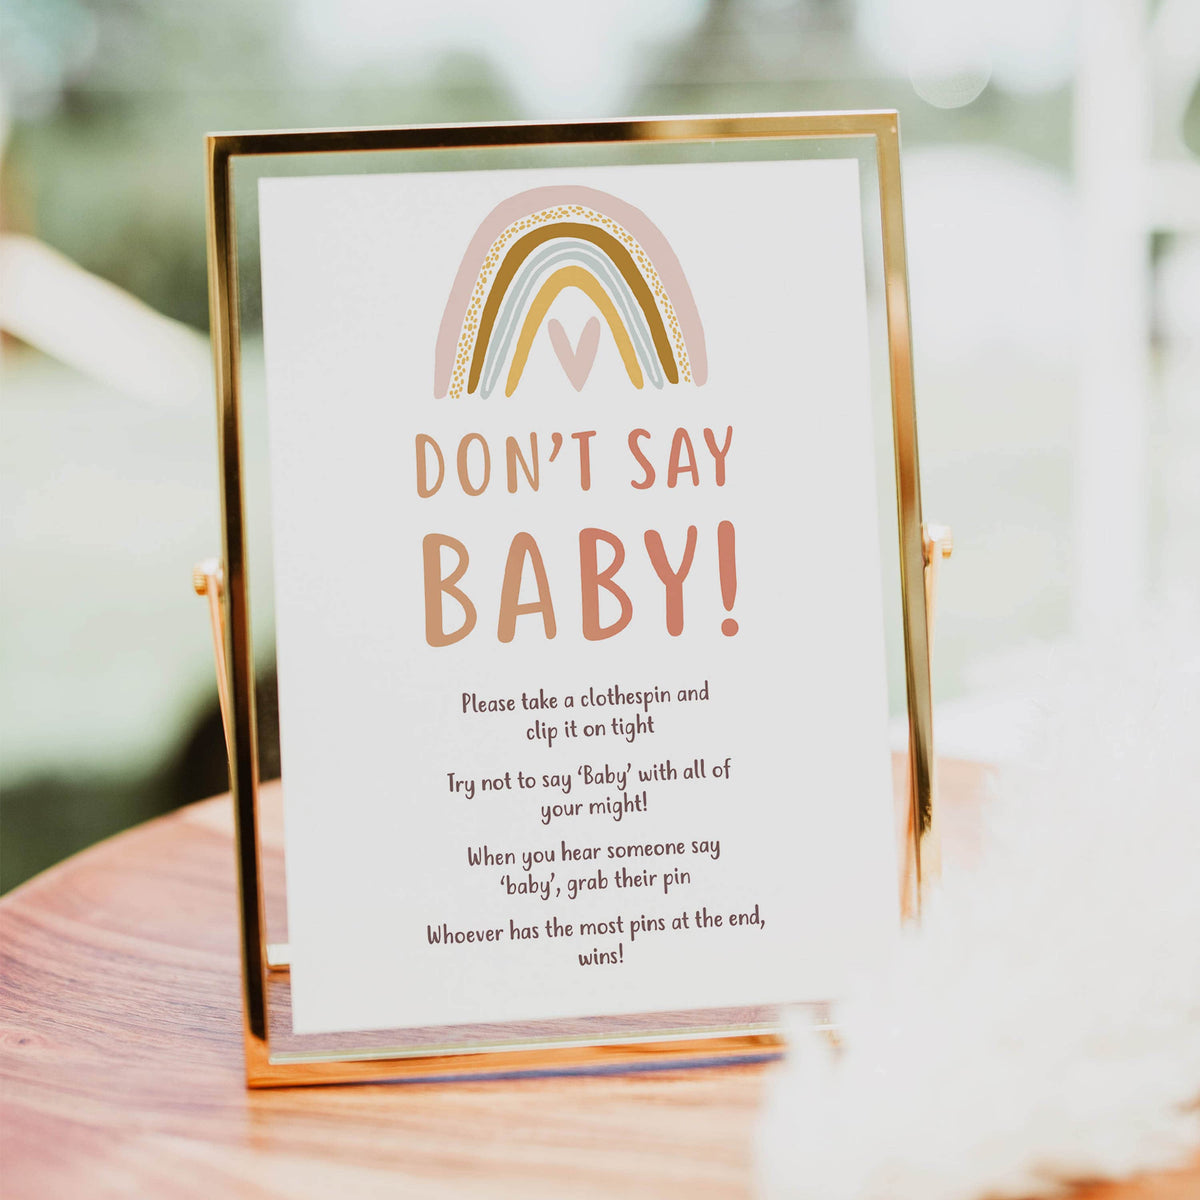 dont say baby game, Printable baby shower games, boho rainbow baby games, baby shower games, fun baby shower ideas, top baby shower ideas, boho rainbow baby shower, baby shower games, fun boho rainbow baby shower ideas